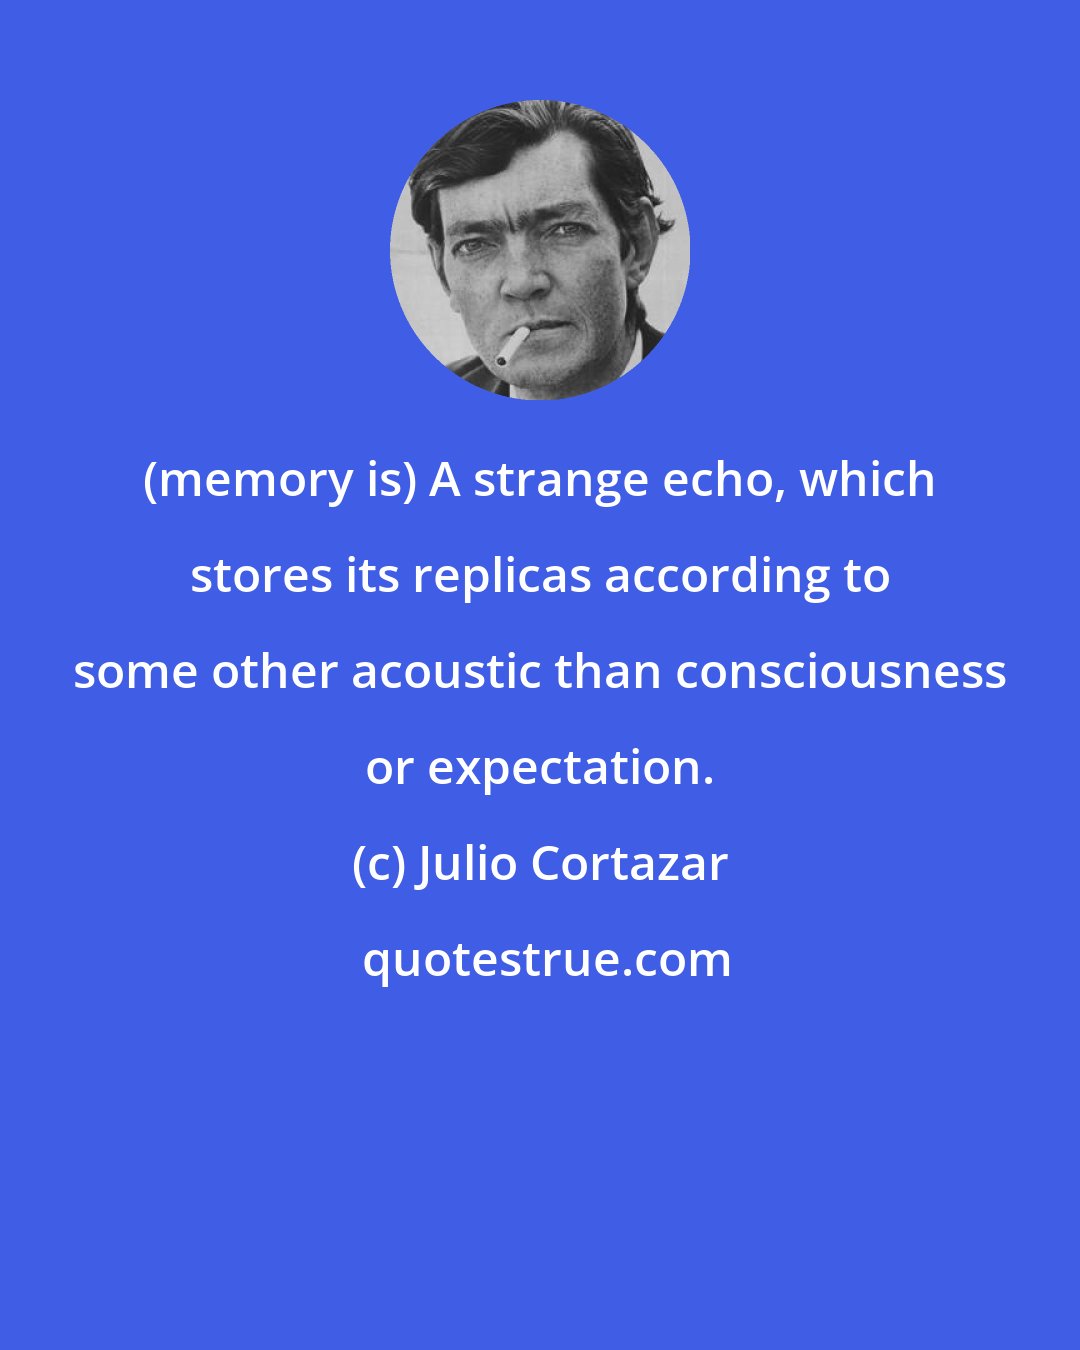 Julio Cortazar: (memory is) A strange echo, which stores its replicas according to some other acoustic than consciousness or expectation.